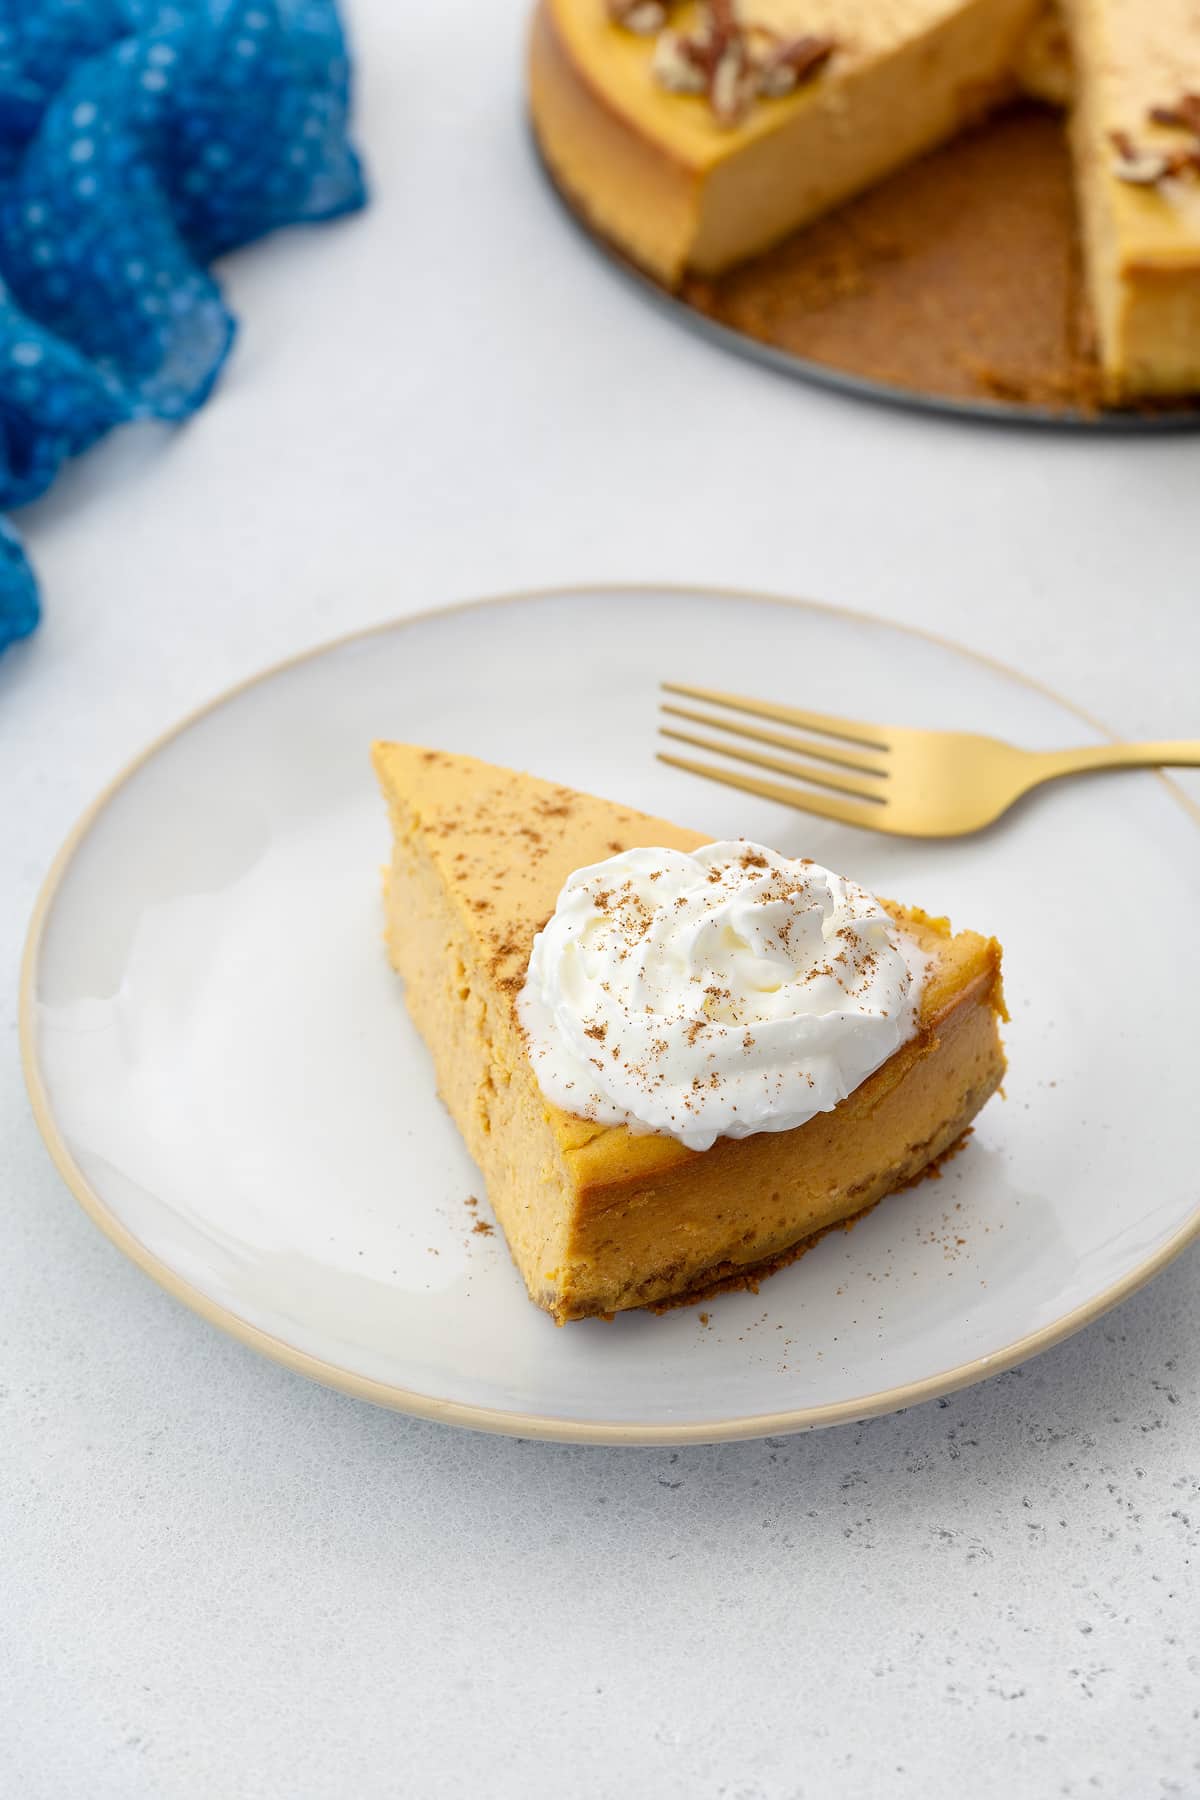 Slice of pumpkin cheesecake topped with cream and cinnamon, served on a white plate with a gold fork, accompanied by a blue towel.